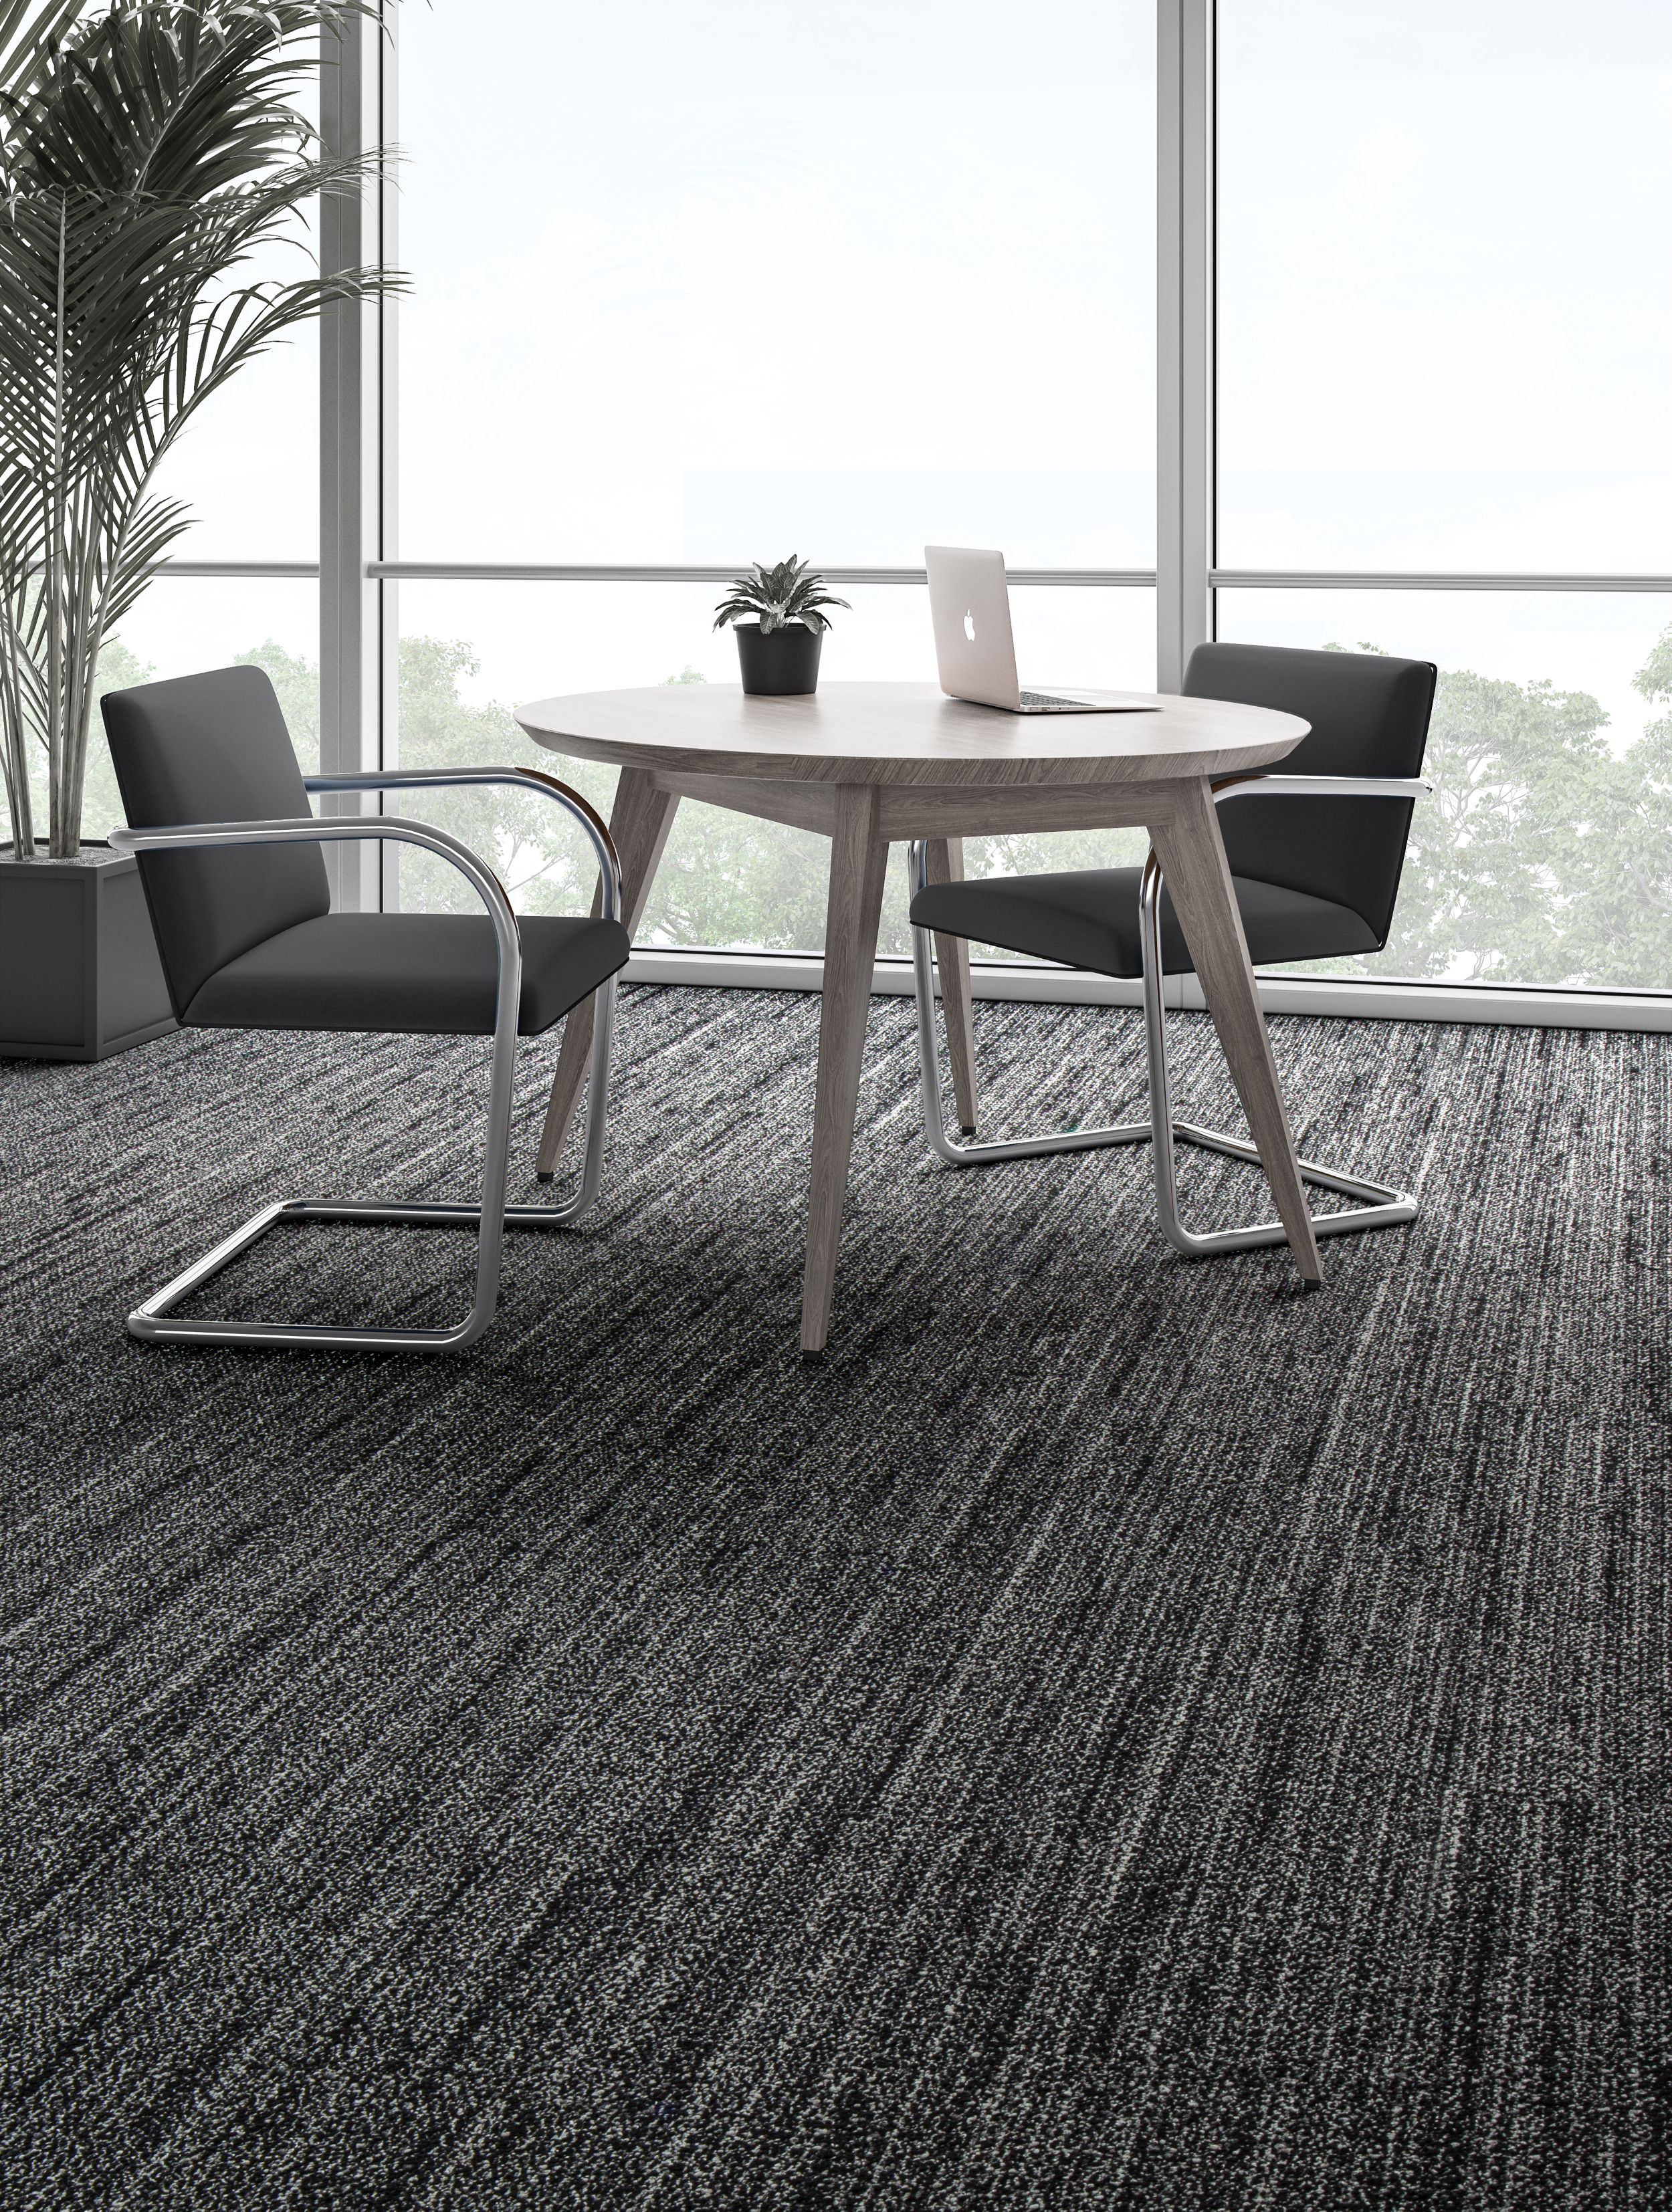 Interface WW870 plank carpet tile shown with small table and chairs número de imagen 12